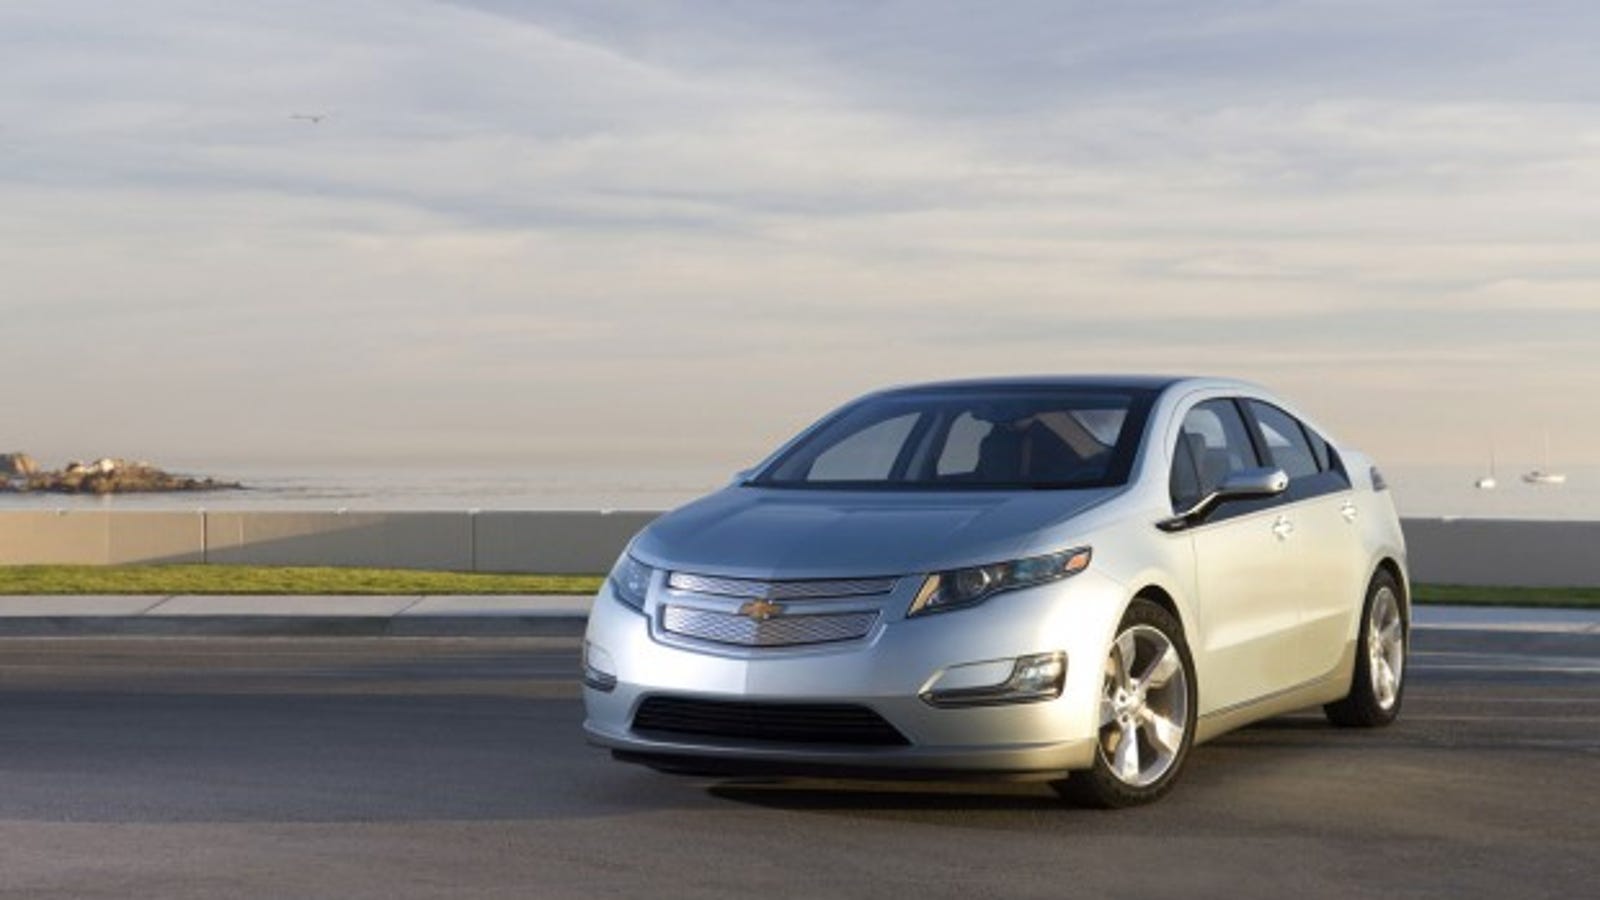 chevy-volt-pre-orders-start-now-41-000-before-7-500-tax-credit